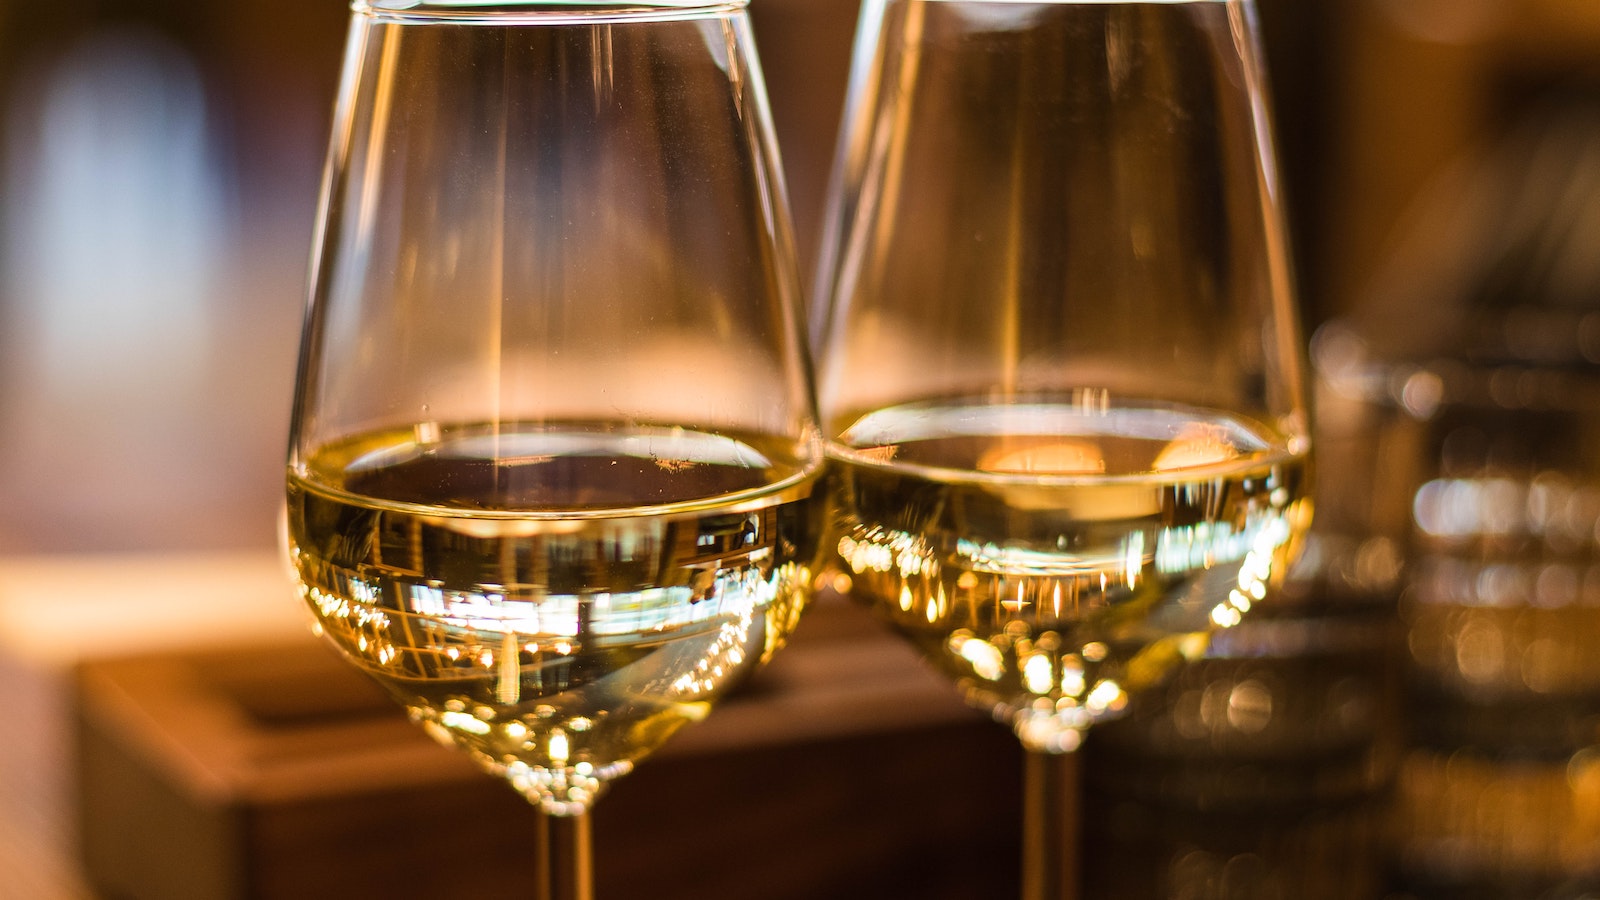 Two wine glasses filled with white wine